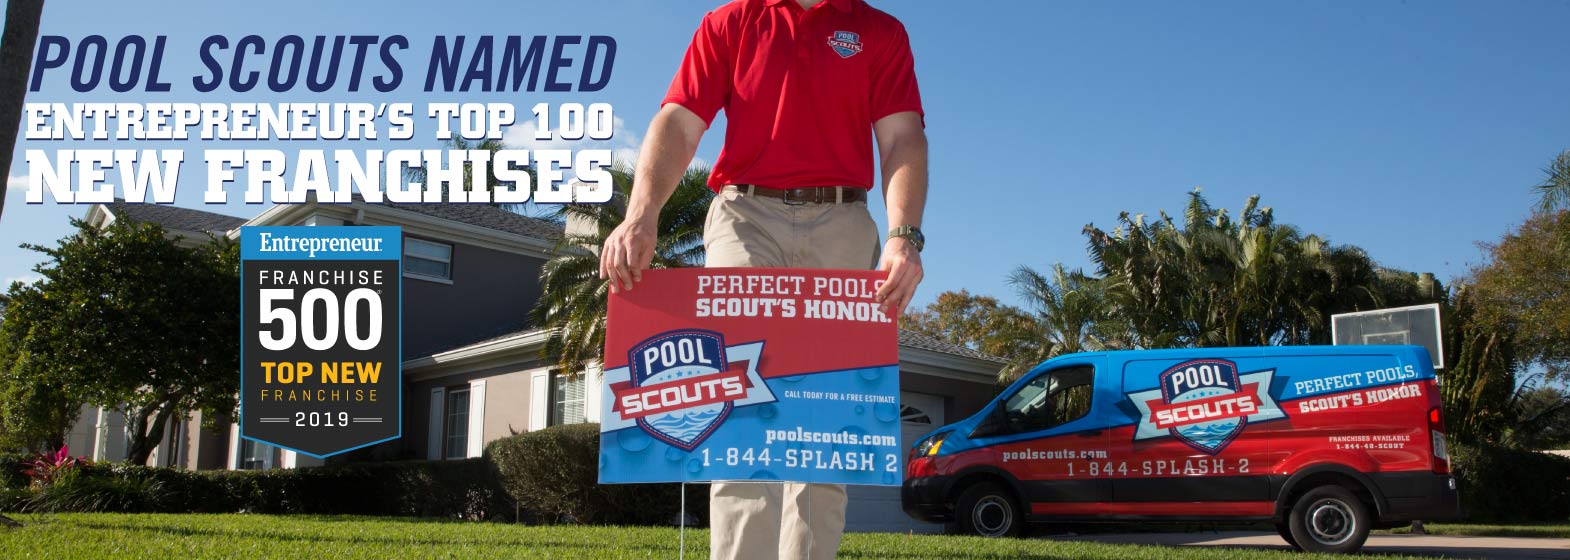 Image of Pool Scouts Named One of Entrepreneur’s Top 100 New Franchises - Pool Scouts